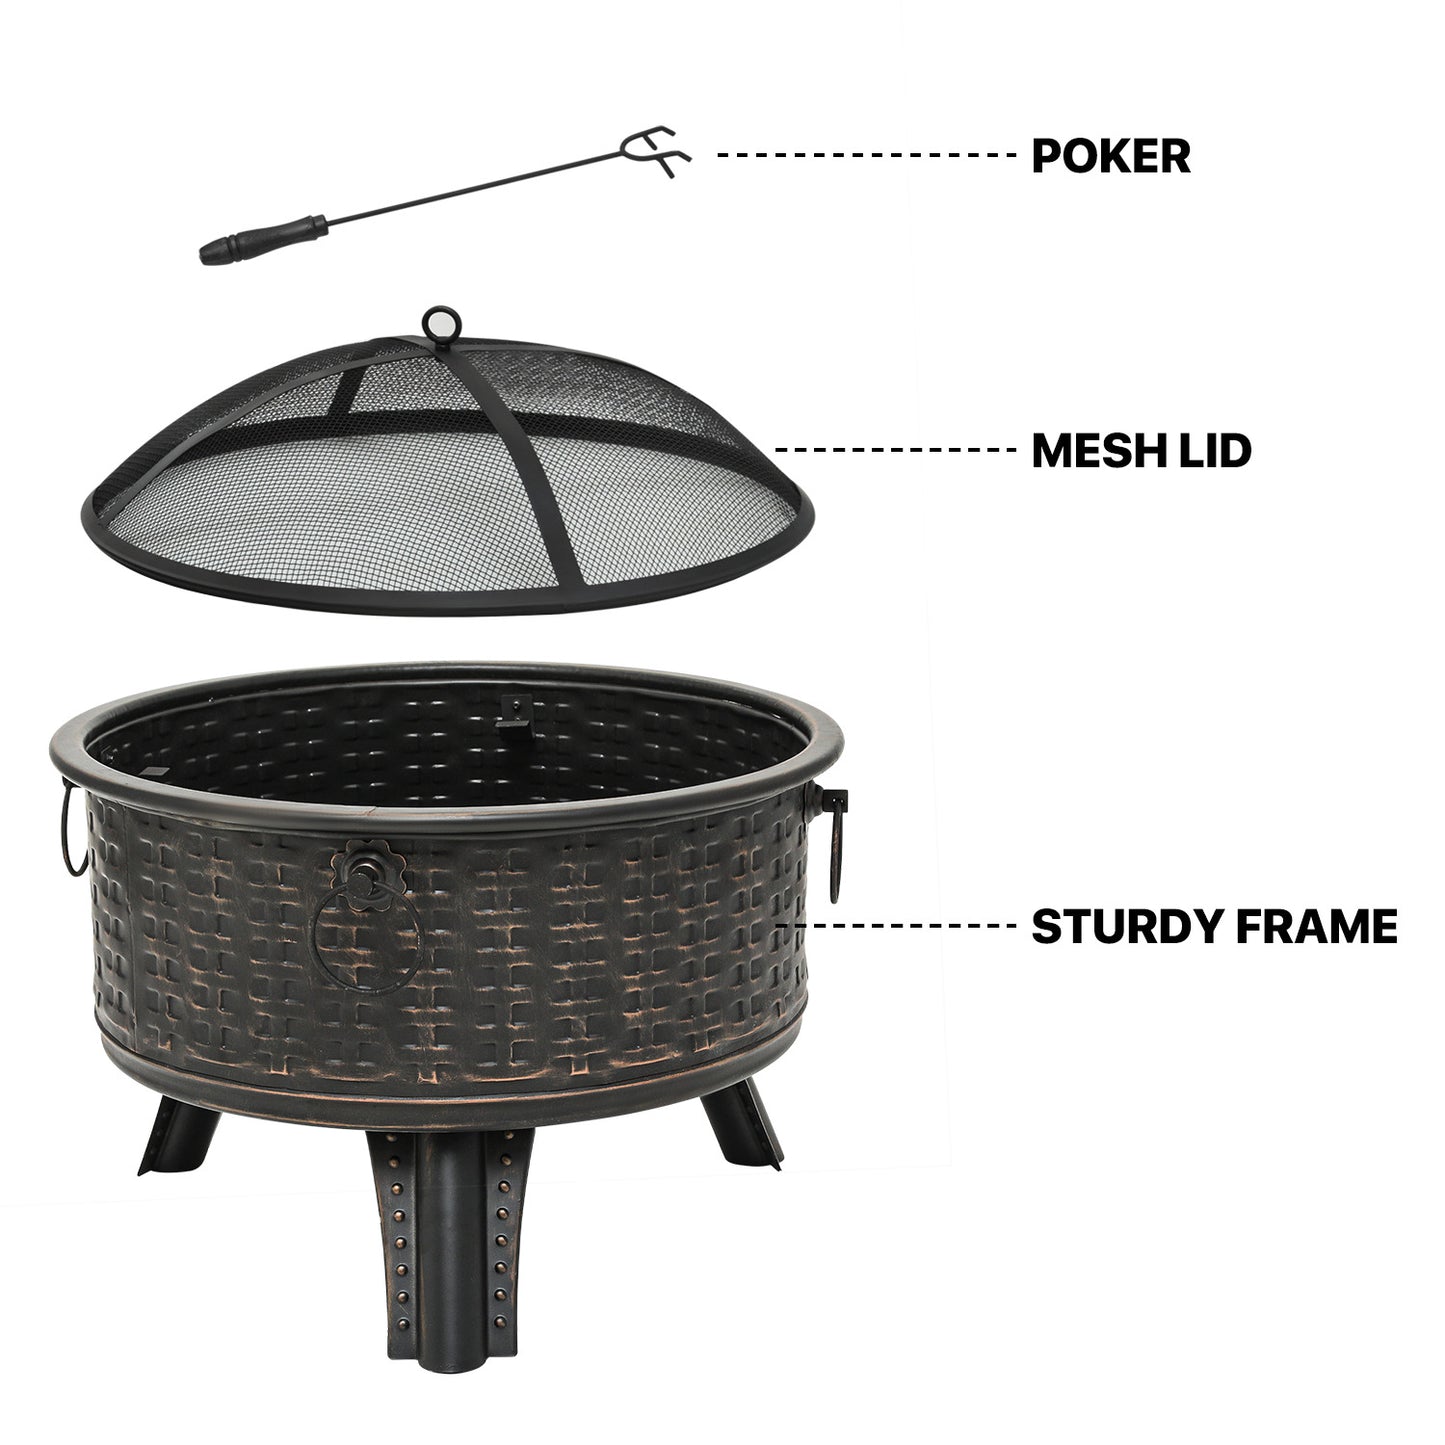 26" Round Fire Pit w/Poker & Spark Screen